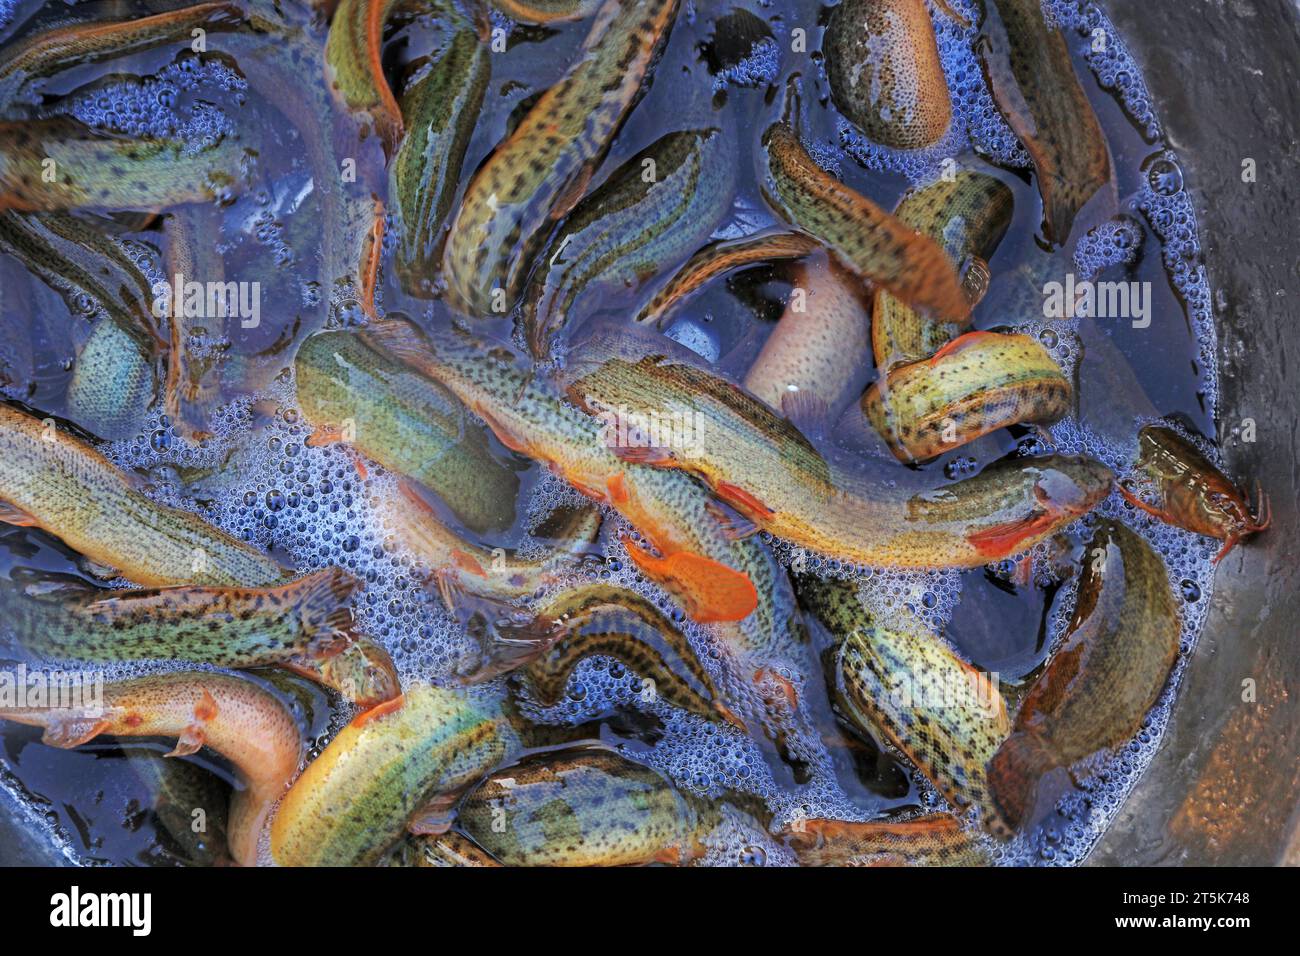 Piles of loach fish Stock Photo